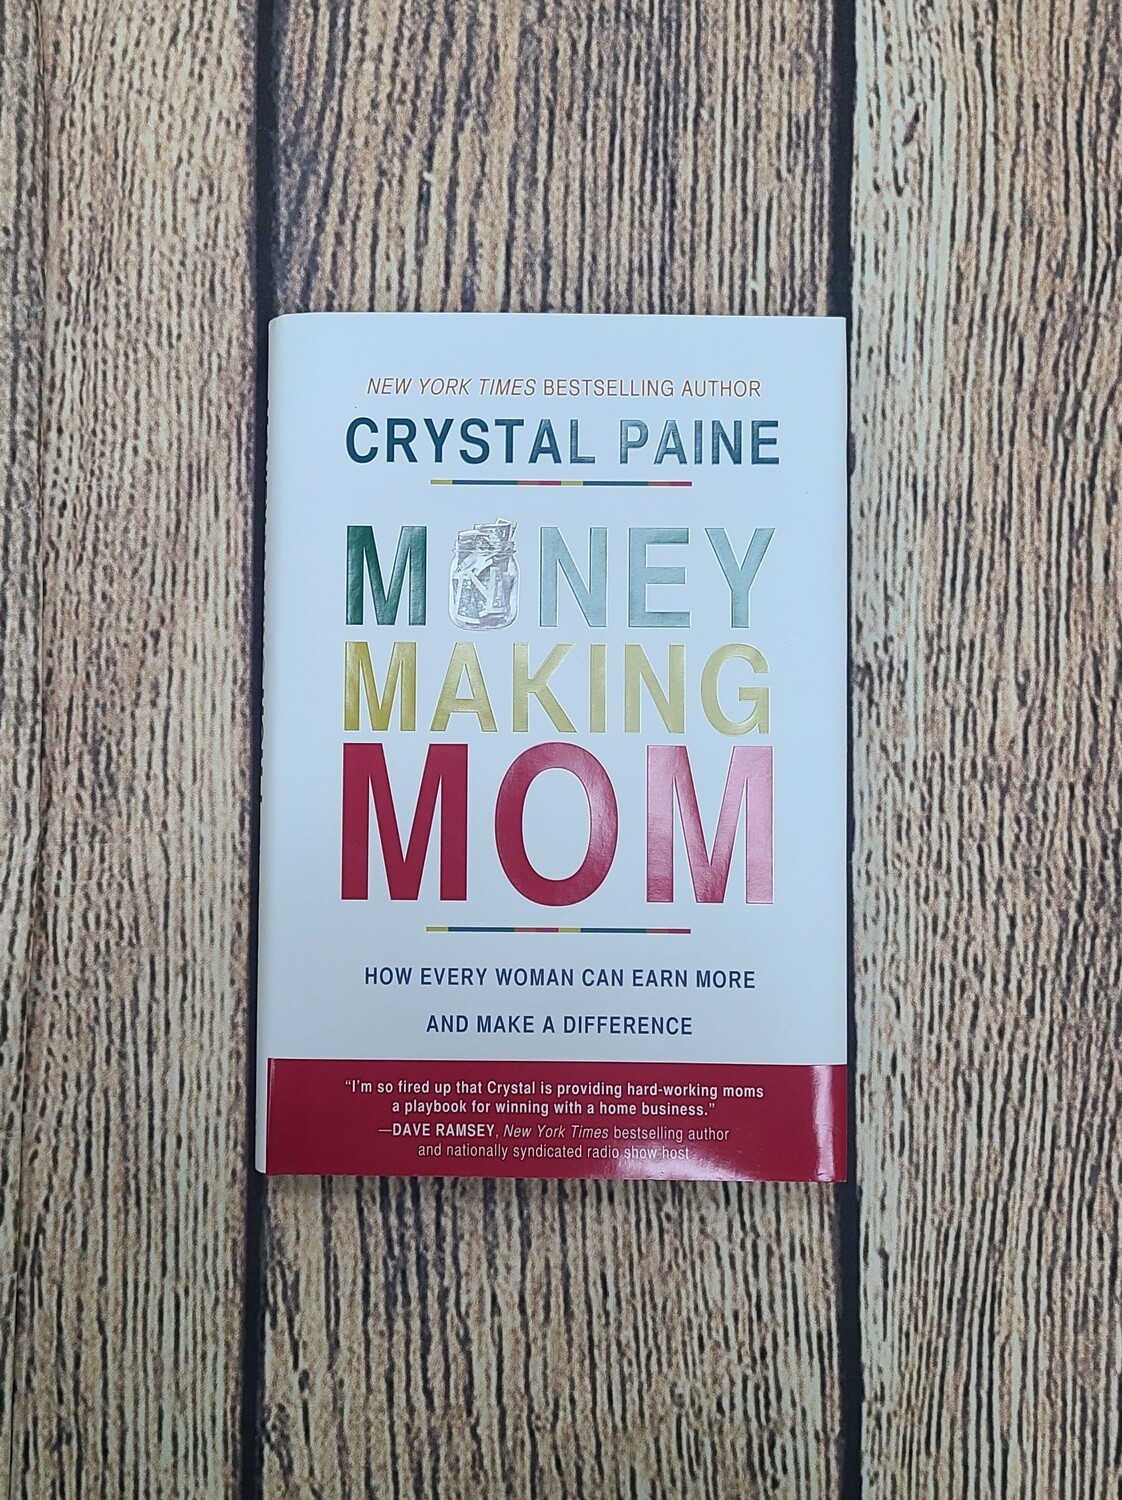 Money Making Mom: How Every Woman Can Earn More and Make a Difference by Crystal Paine